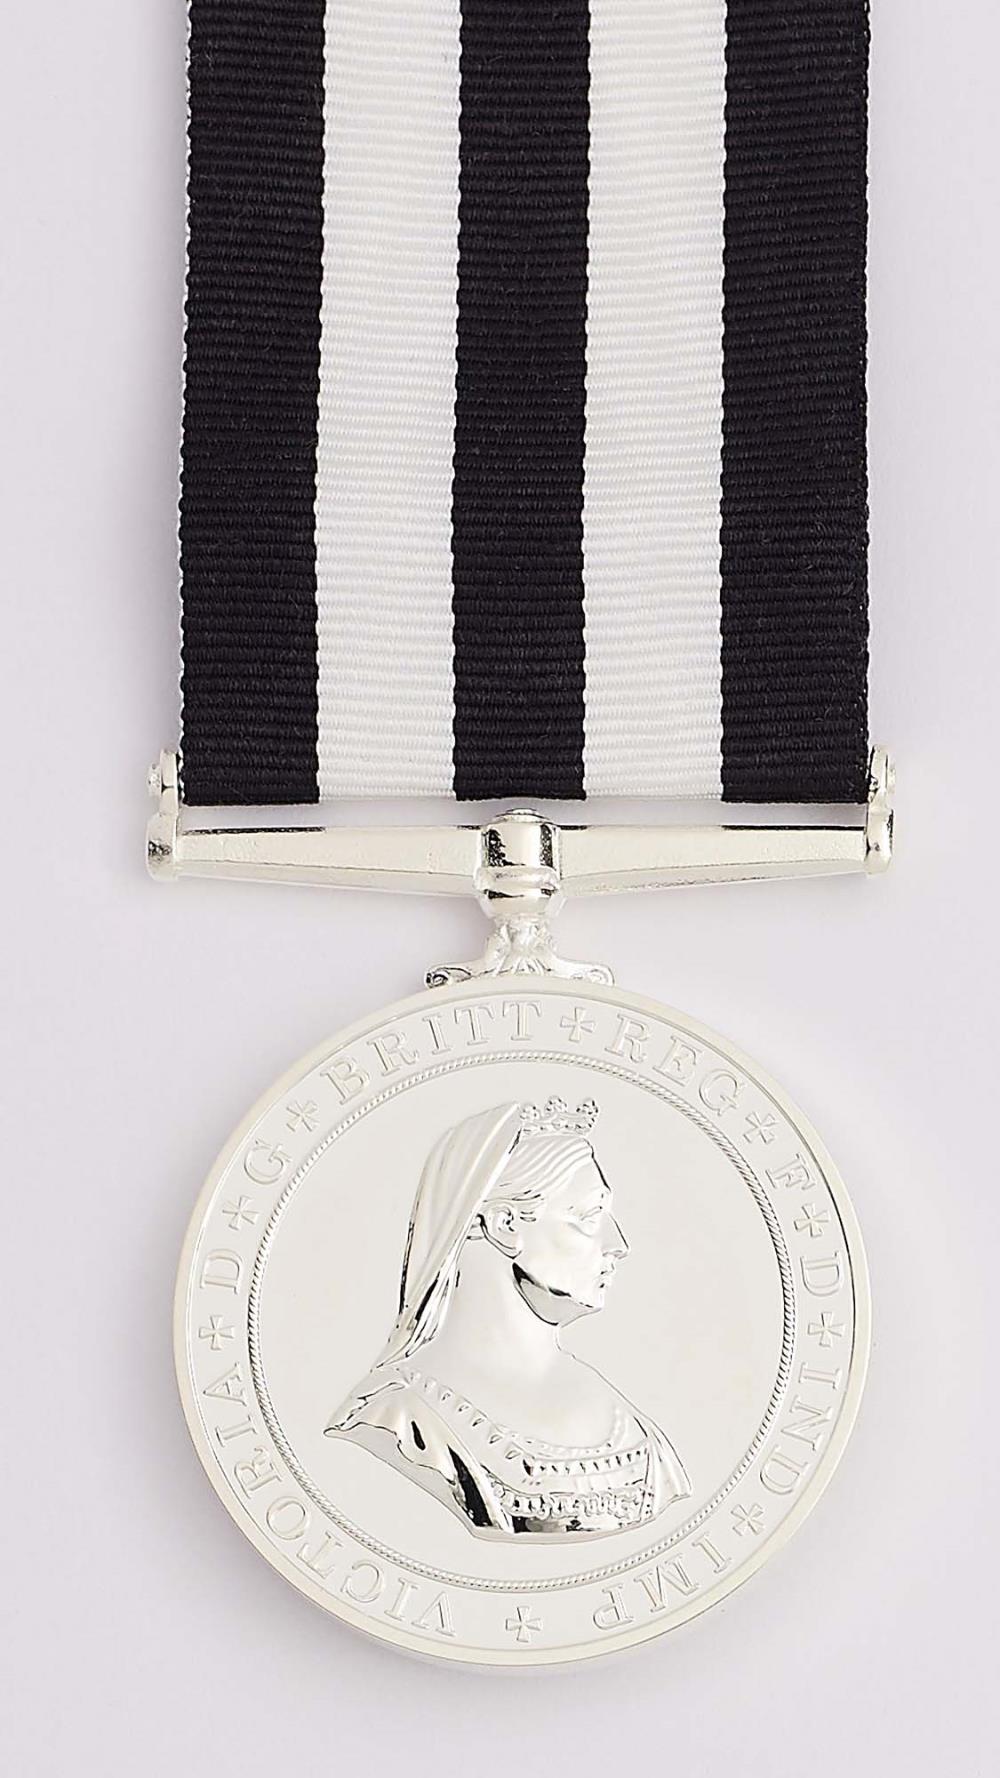 Worcestershire Medal Service: Service Medal of the Order of St John